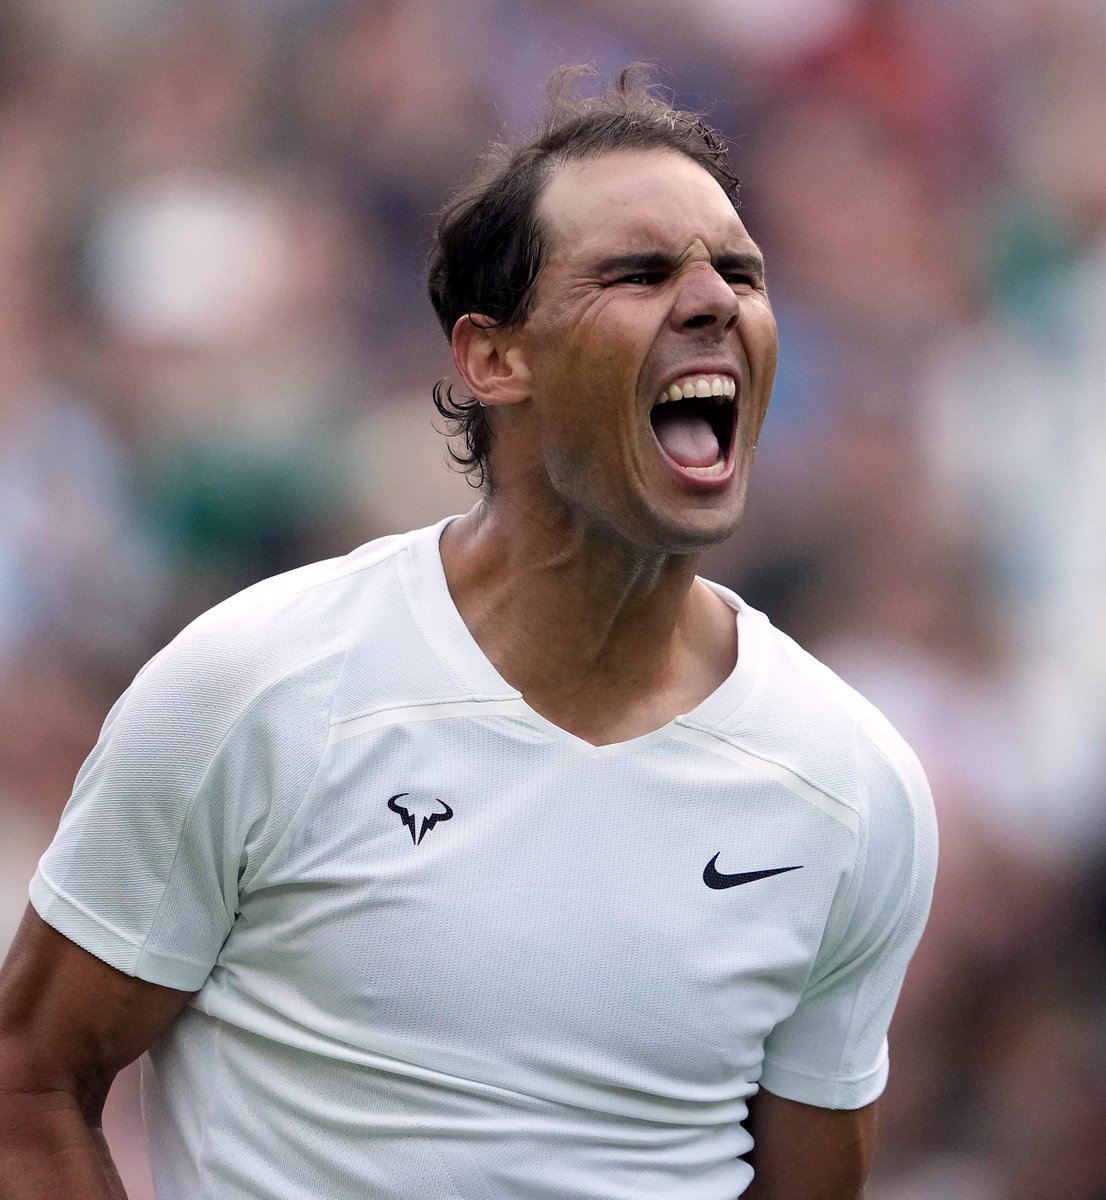 A super competitor who never ever gives up despite all adversities. Amazing game of tennis last evening @RafaelNadal. The way you compete each time you’re on the court is just brilliant to watch. #Wimbledon